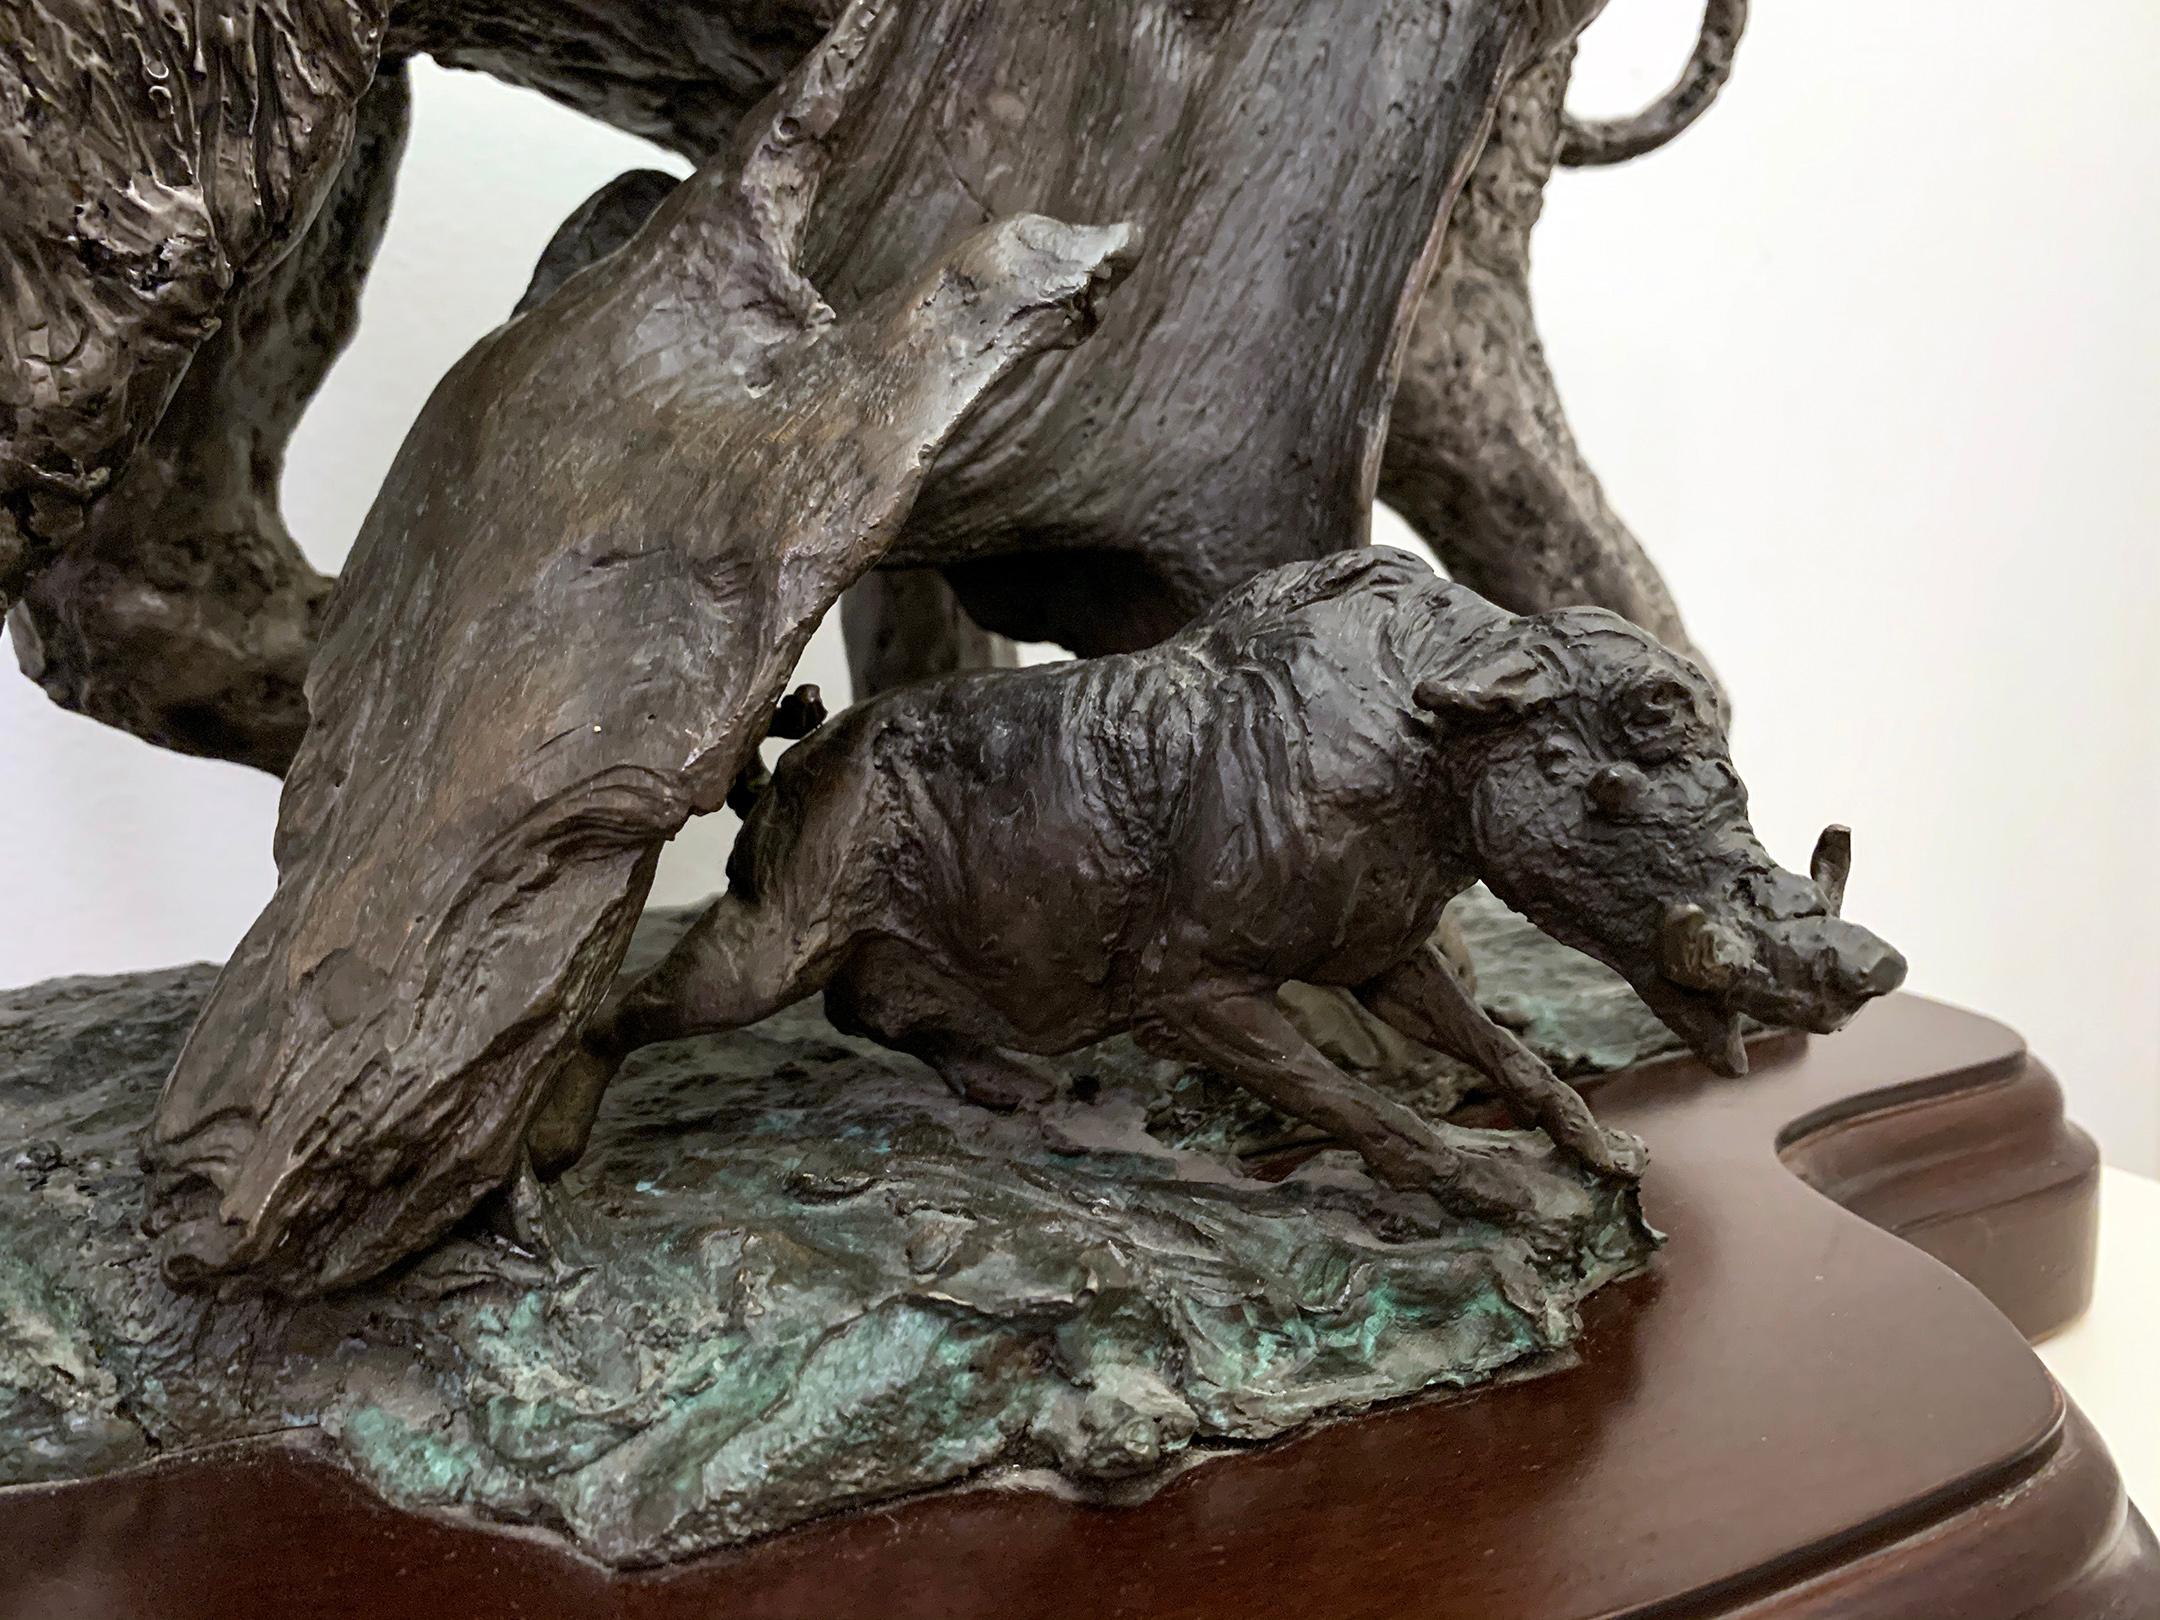 A stunning large bronze sculpture depicting a majestic elephant with a warthog. Signed in bronze, circa 2003, 5/250. Acquired directly from artist.

Lorenzo Ghiglieri is an Oregon artist and sculptor (b. 1931). The Portland, Oregon newspaper